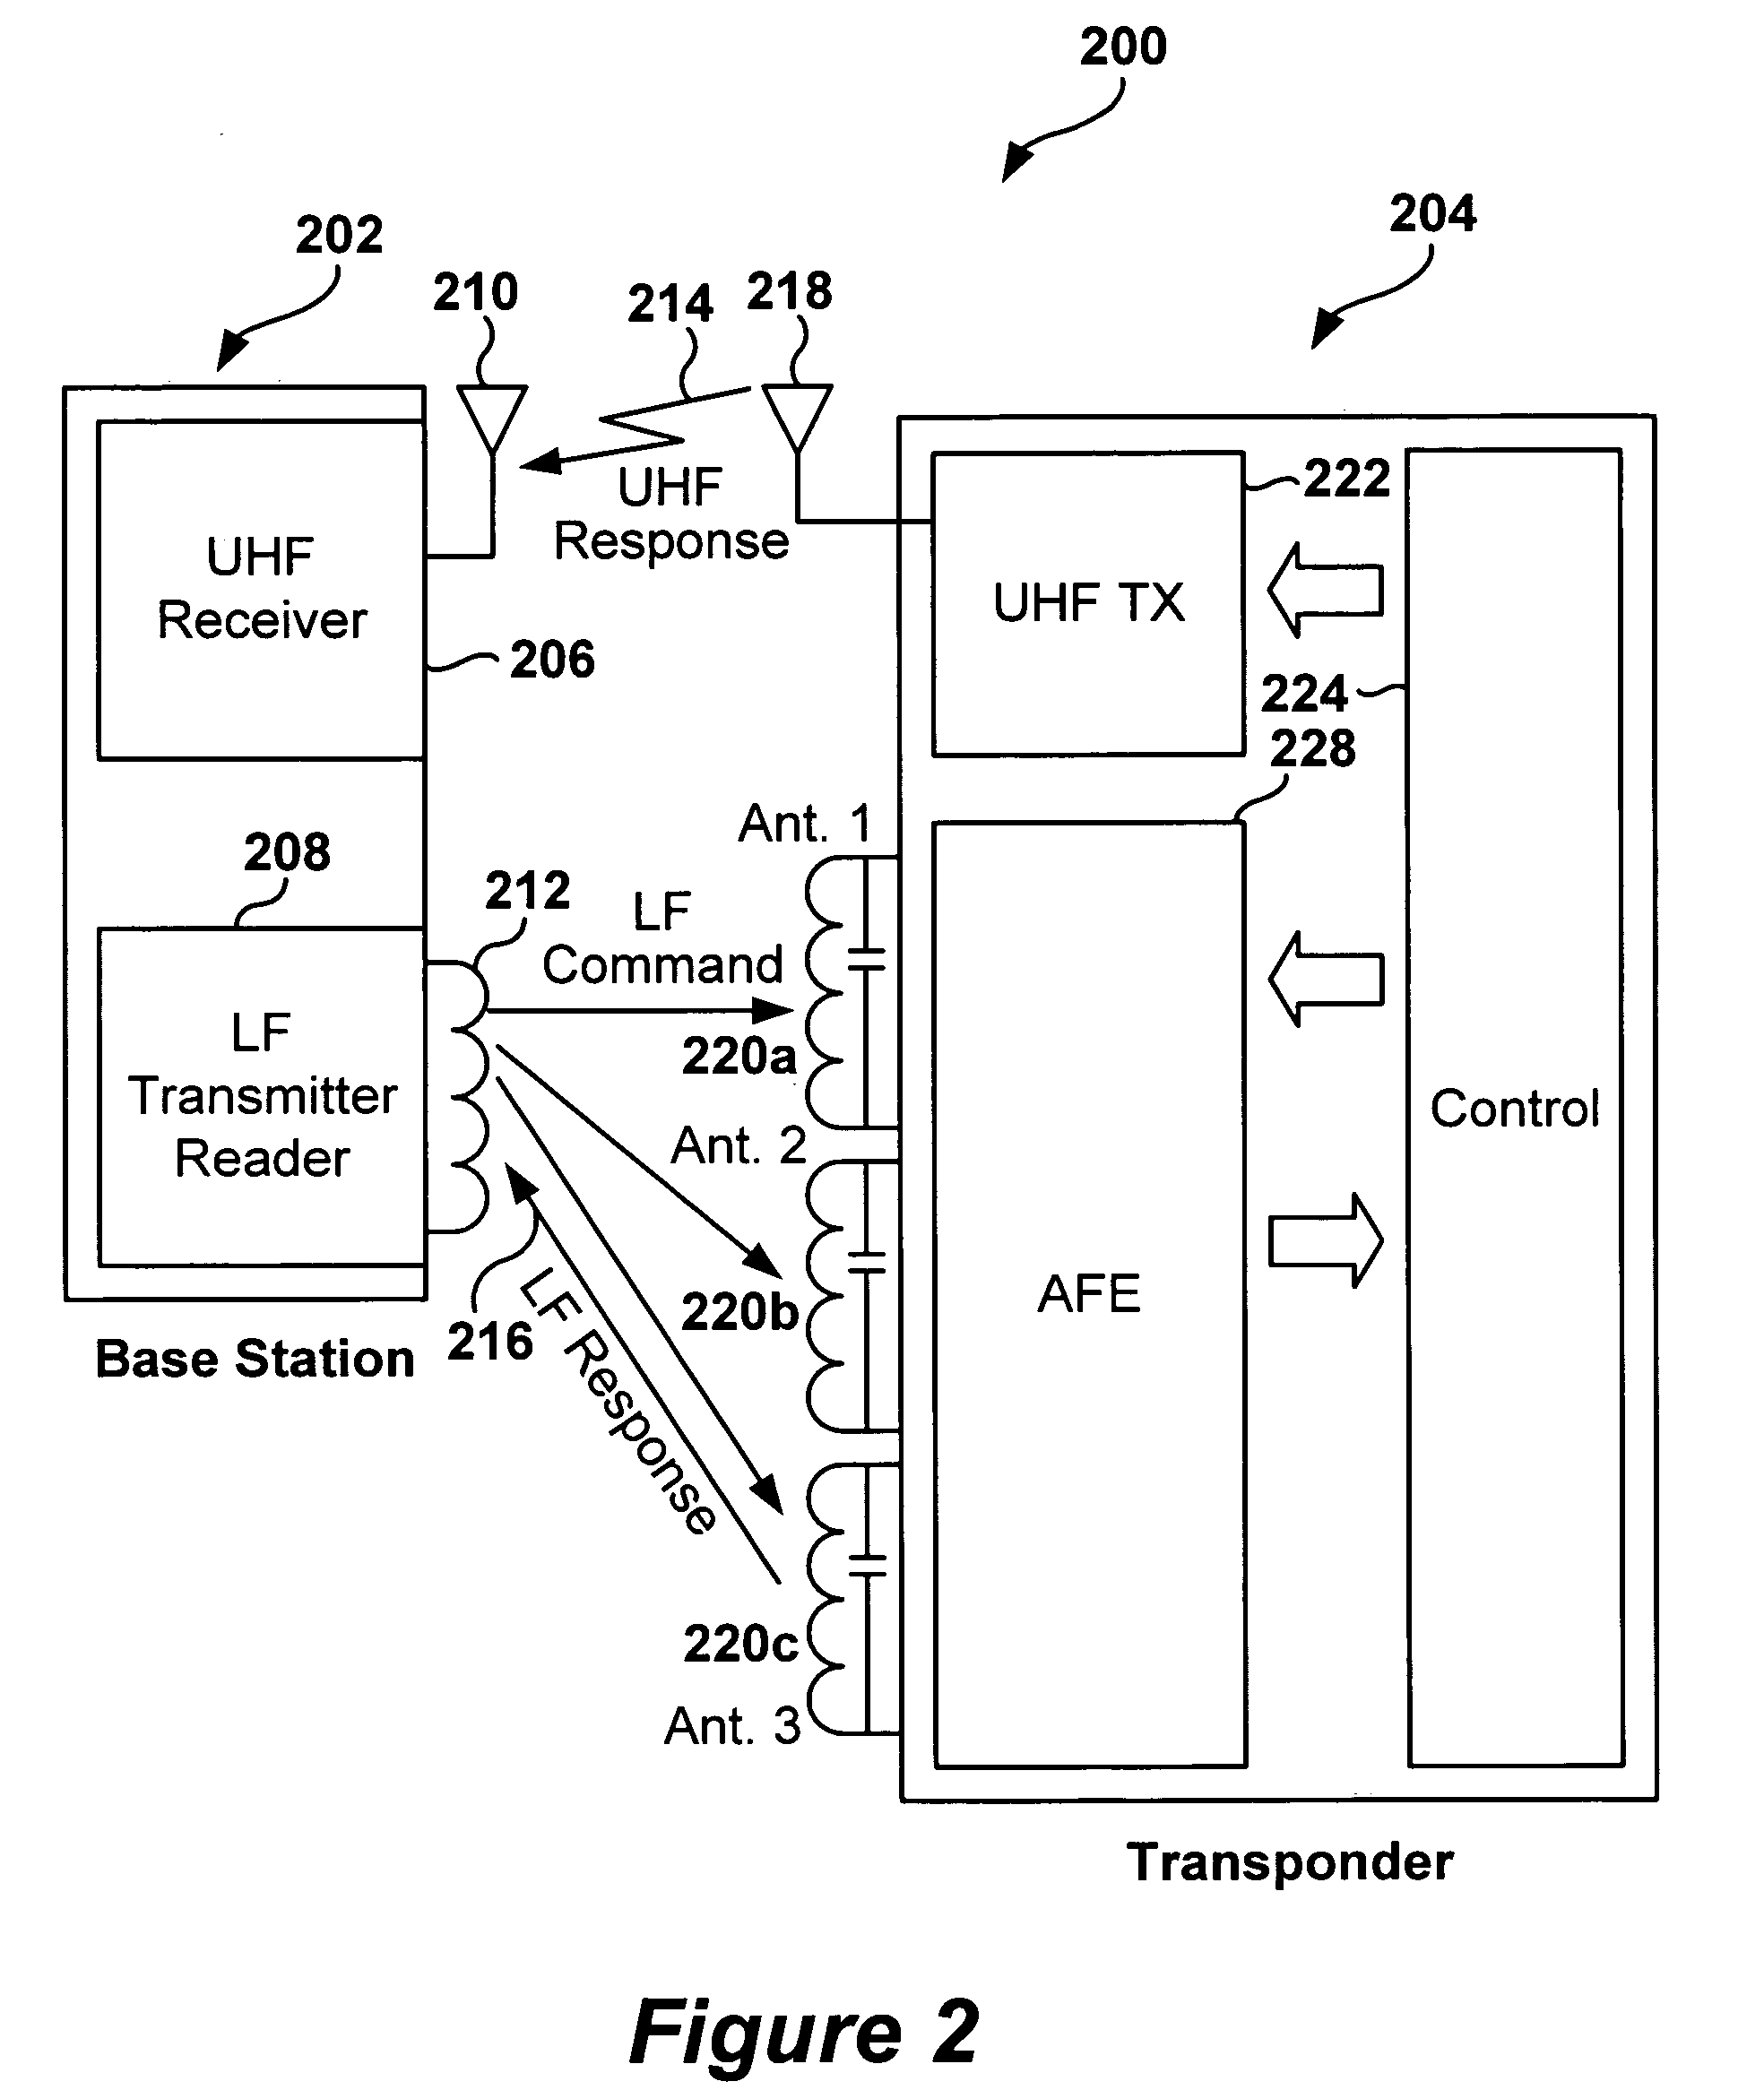 Noise alarm timer function for three-axis low frequency transponder